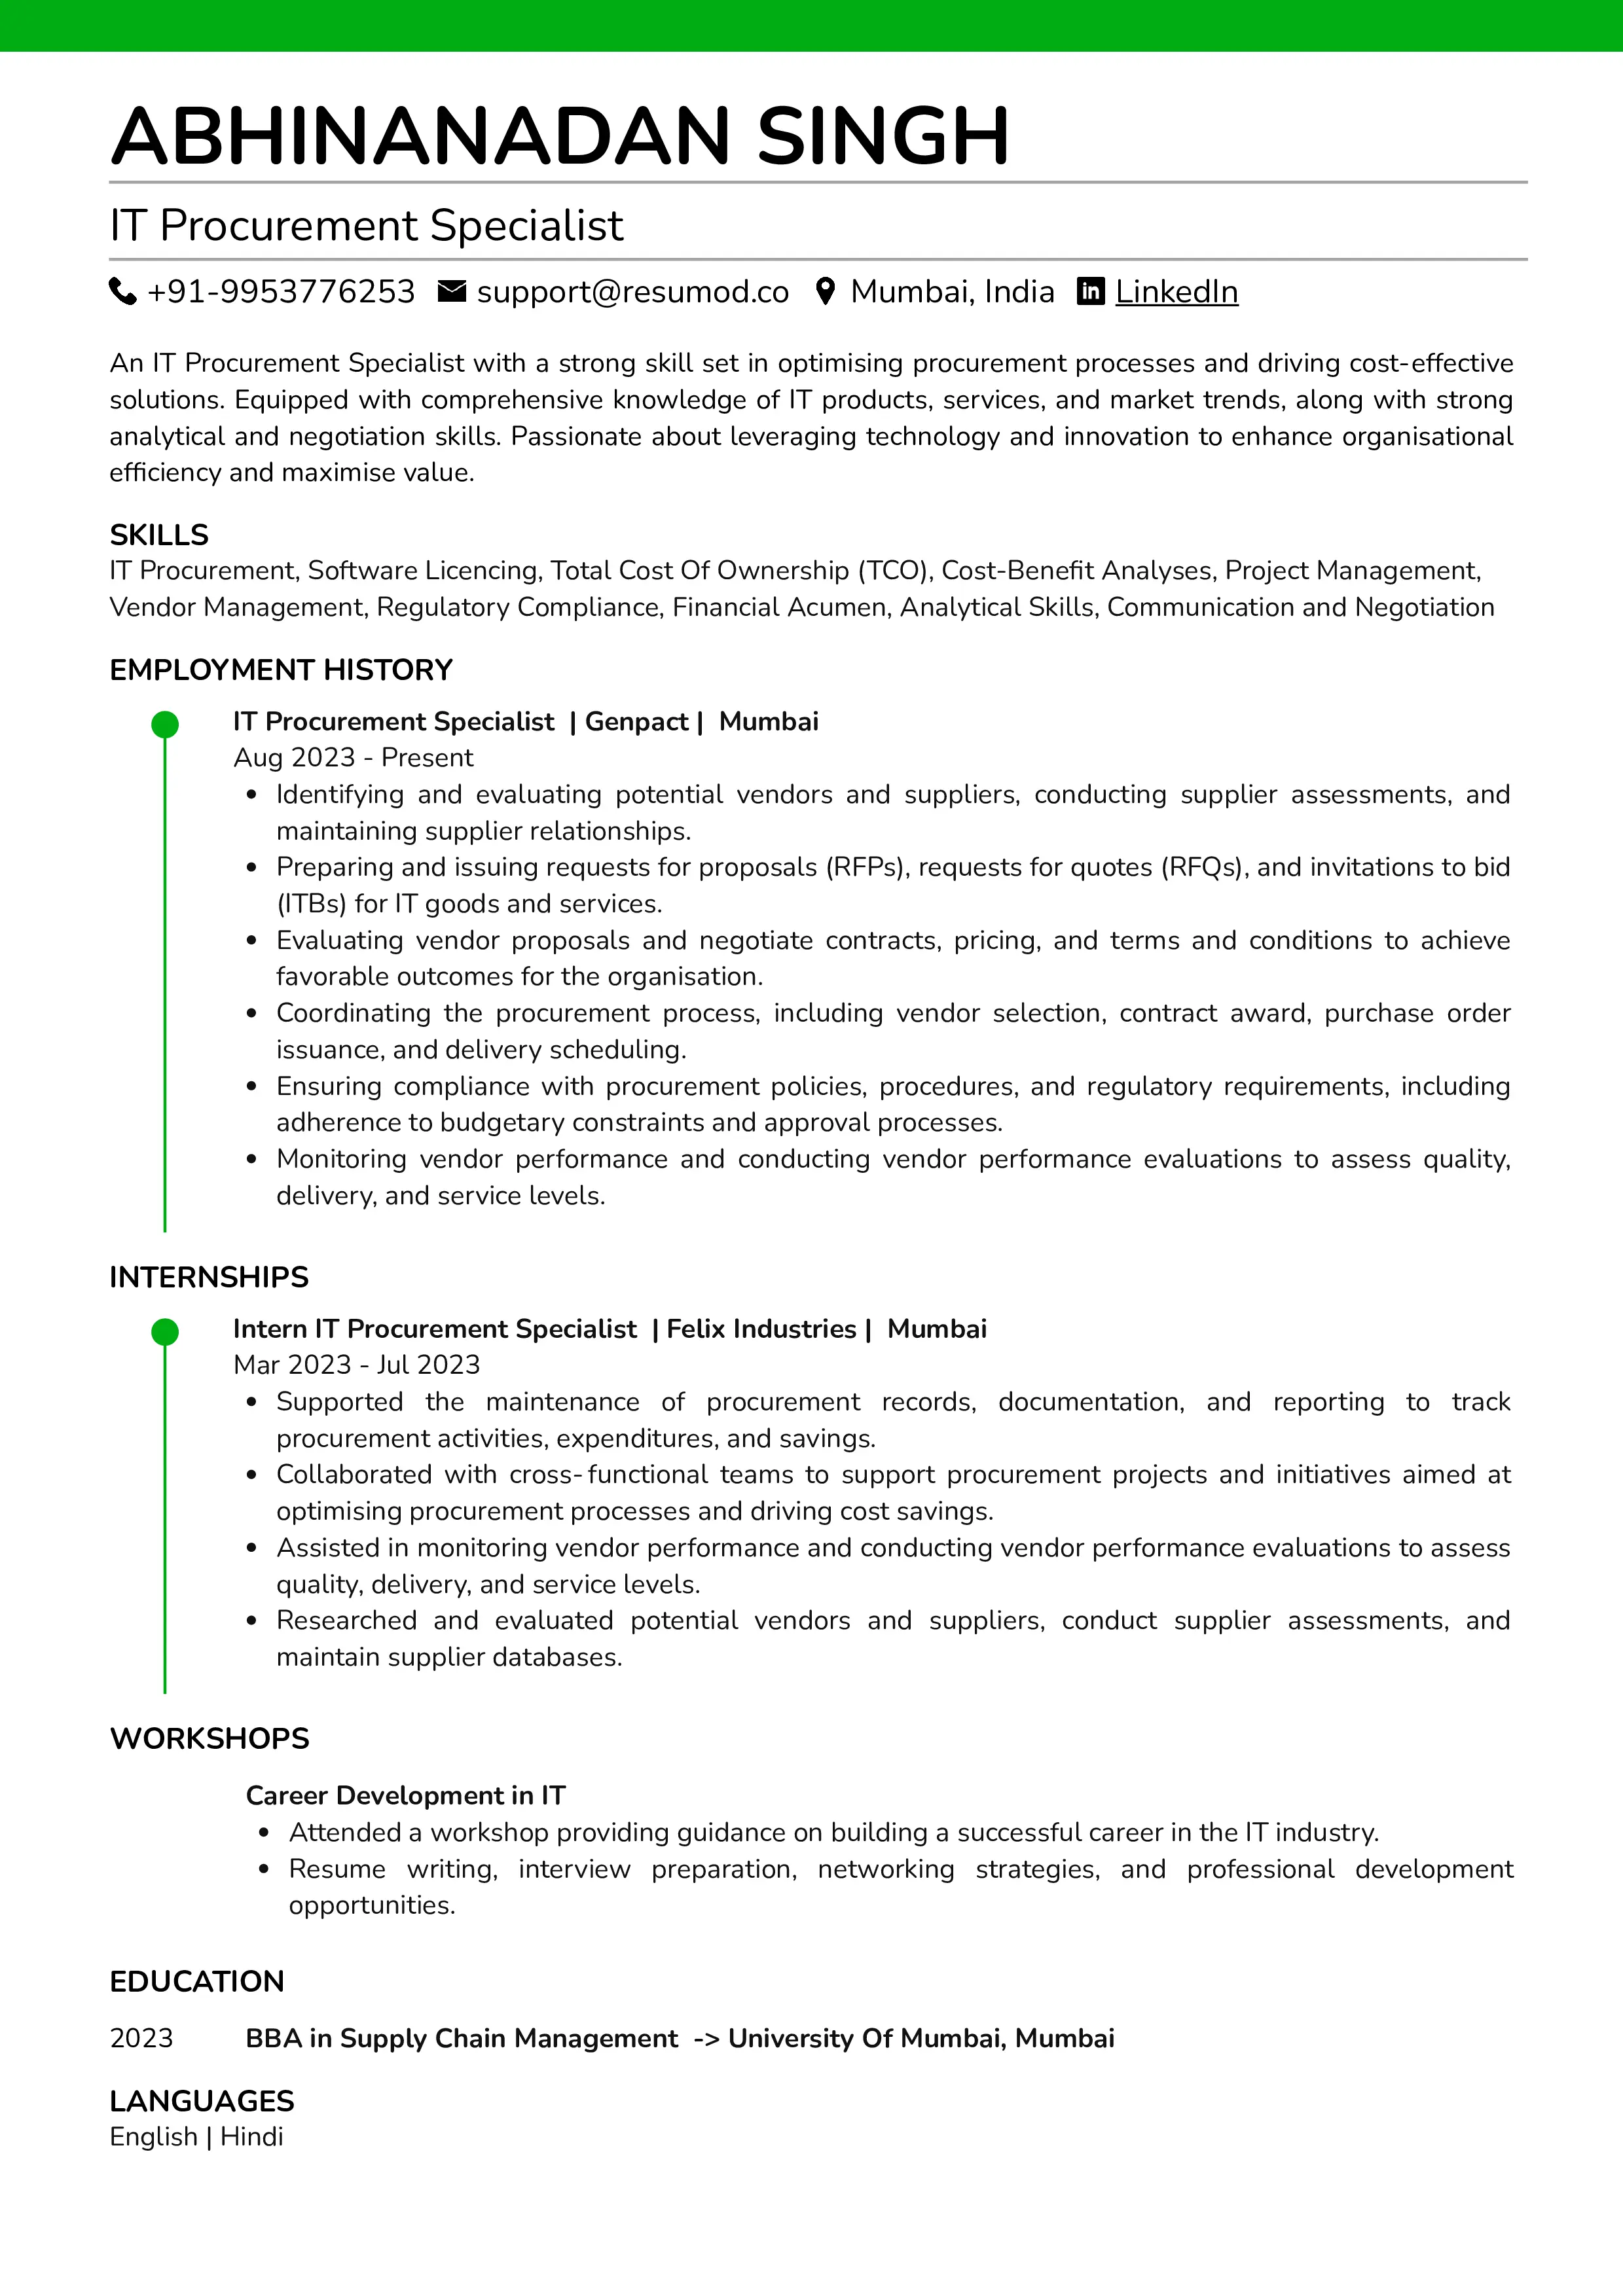 Sample Resume of IT Procurement Specialist | Free Resume Templates & Samples on Resumod.co